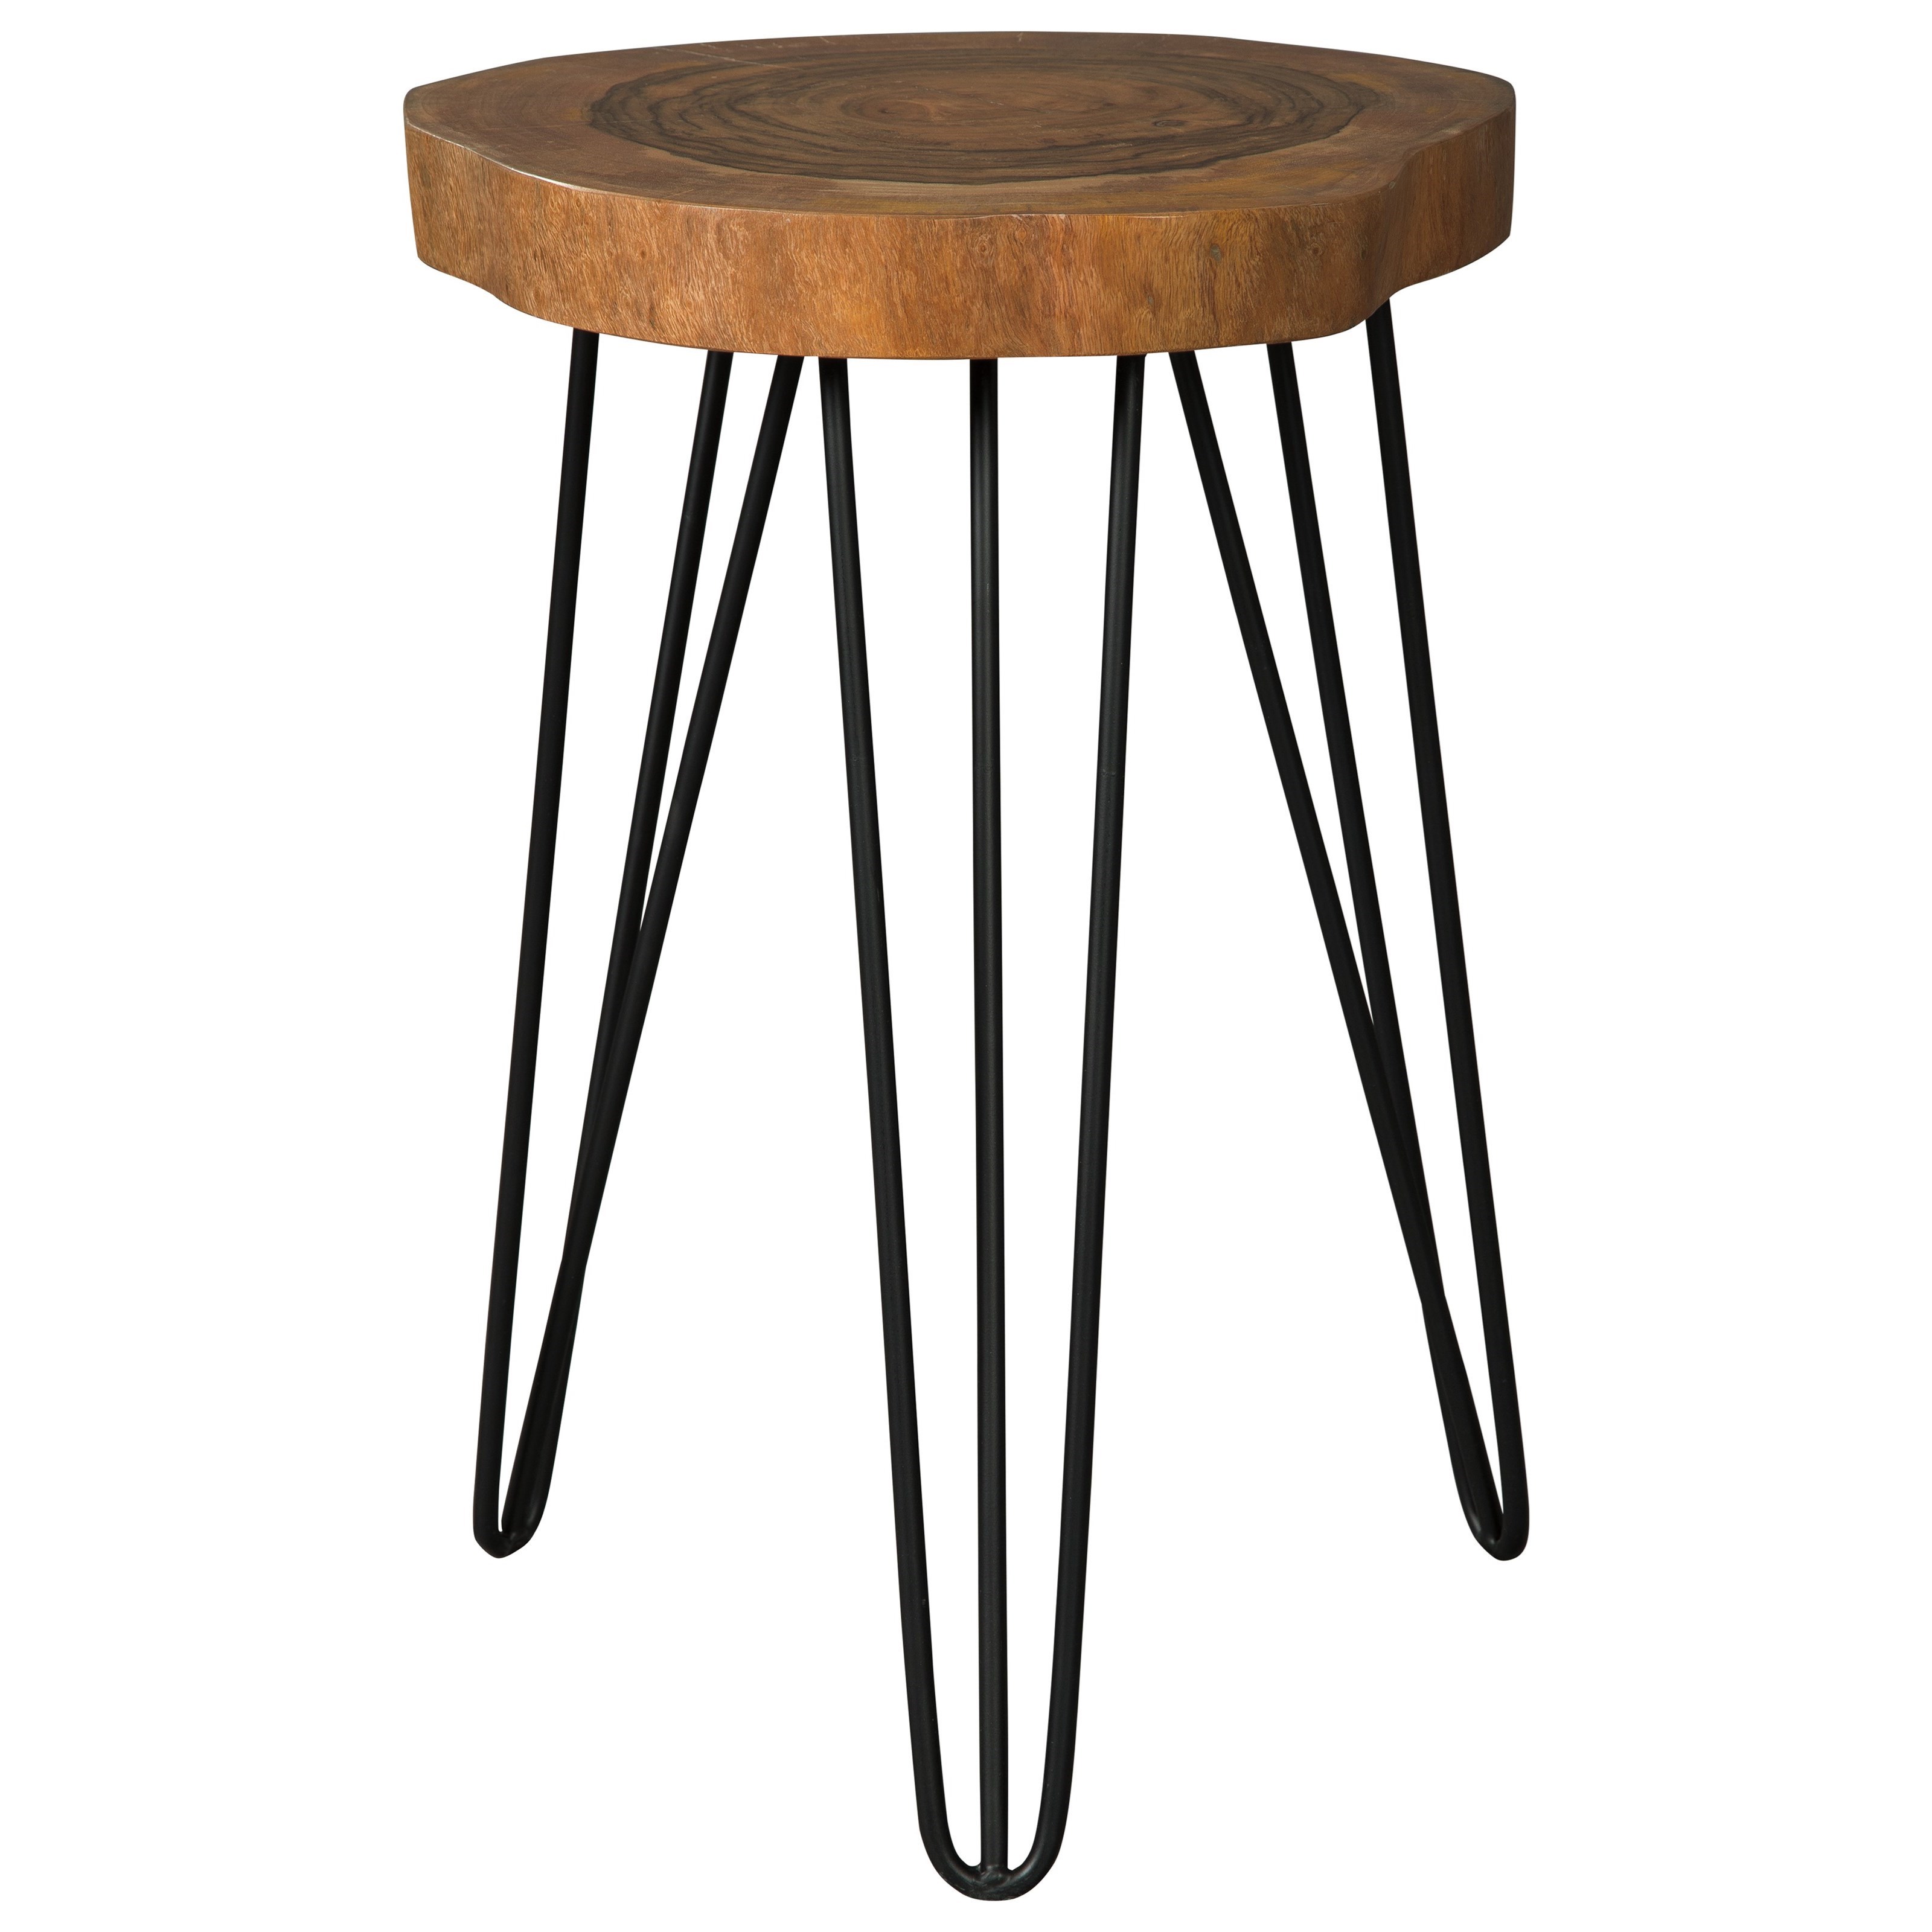 signature design ashley eversboro solid wood accent table with products color oak tables black and chrome end contemporary occasional metal coffee legs glass top mirror side